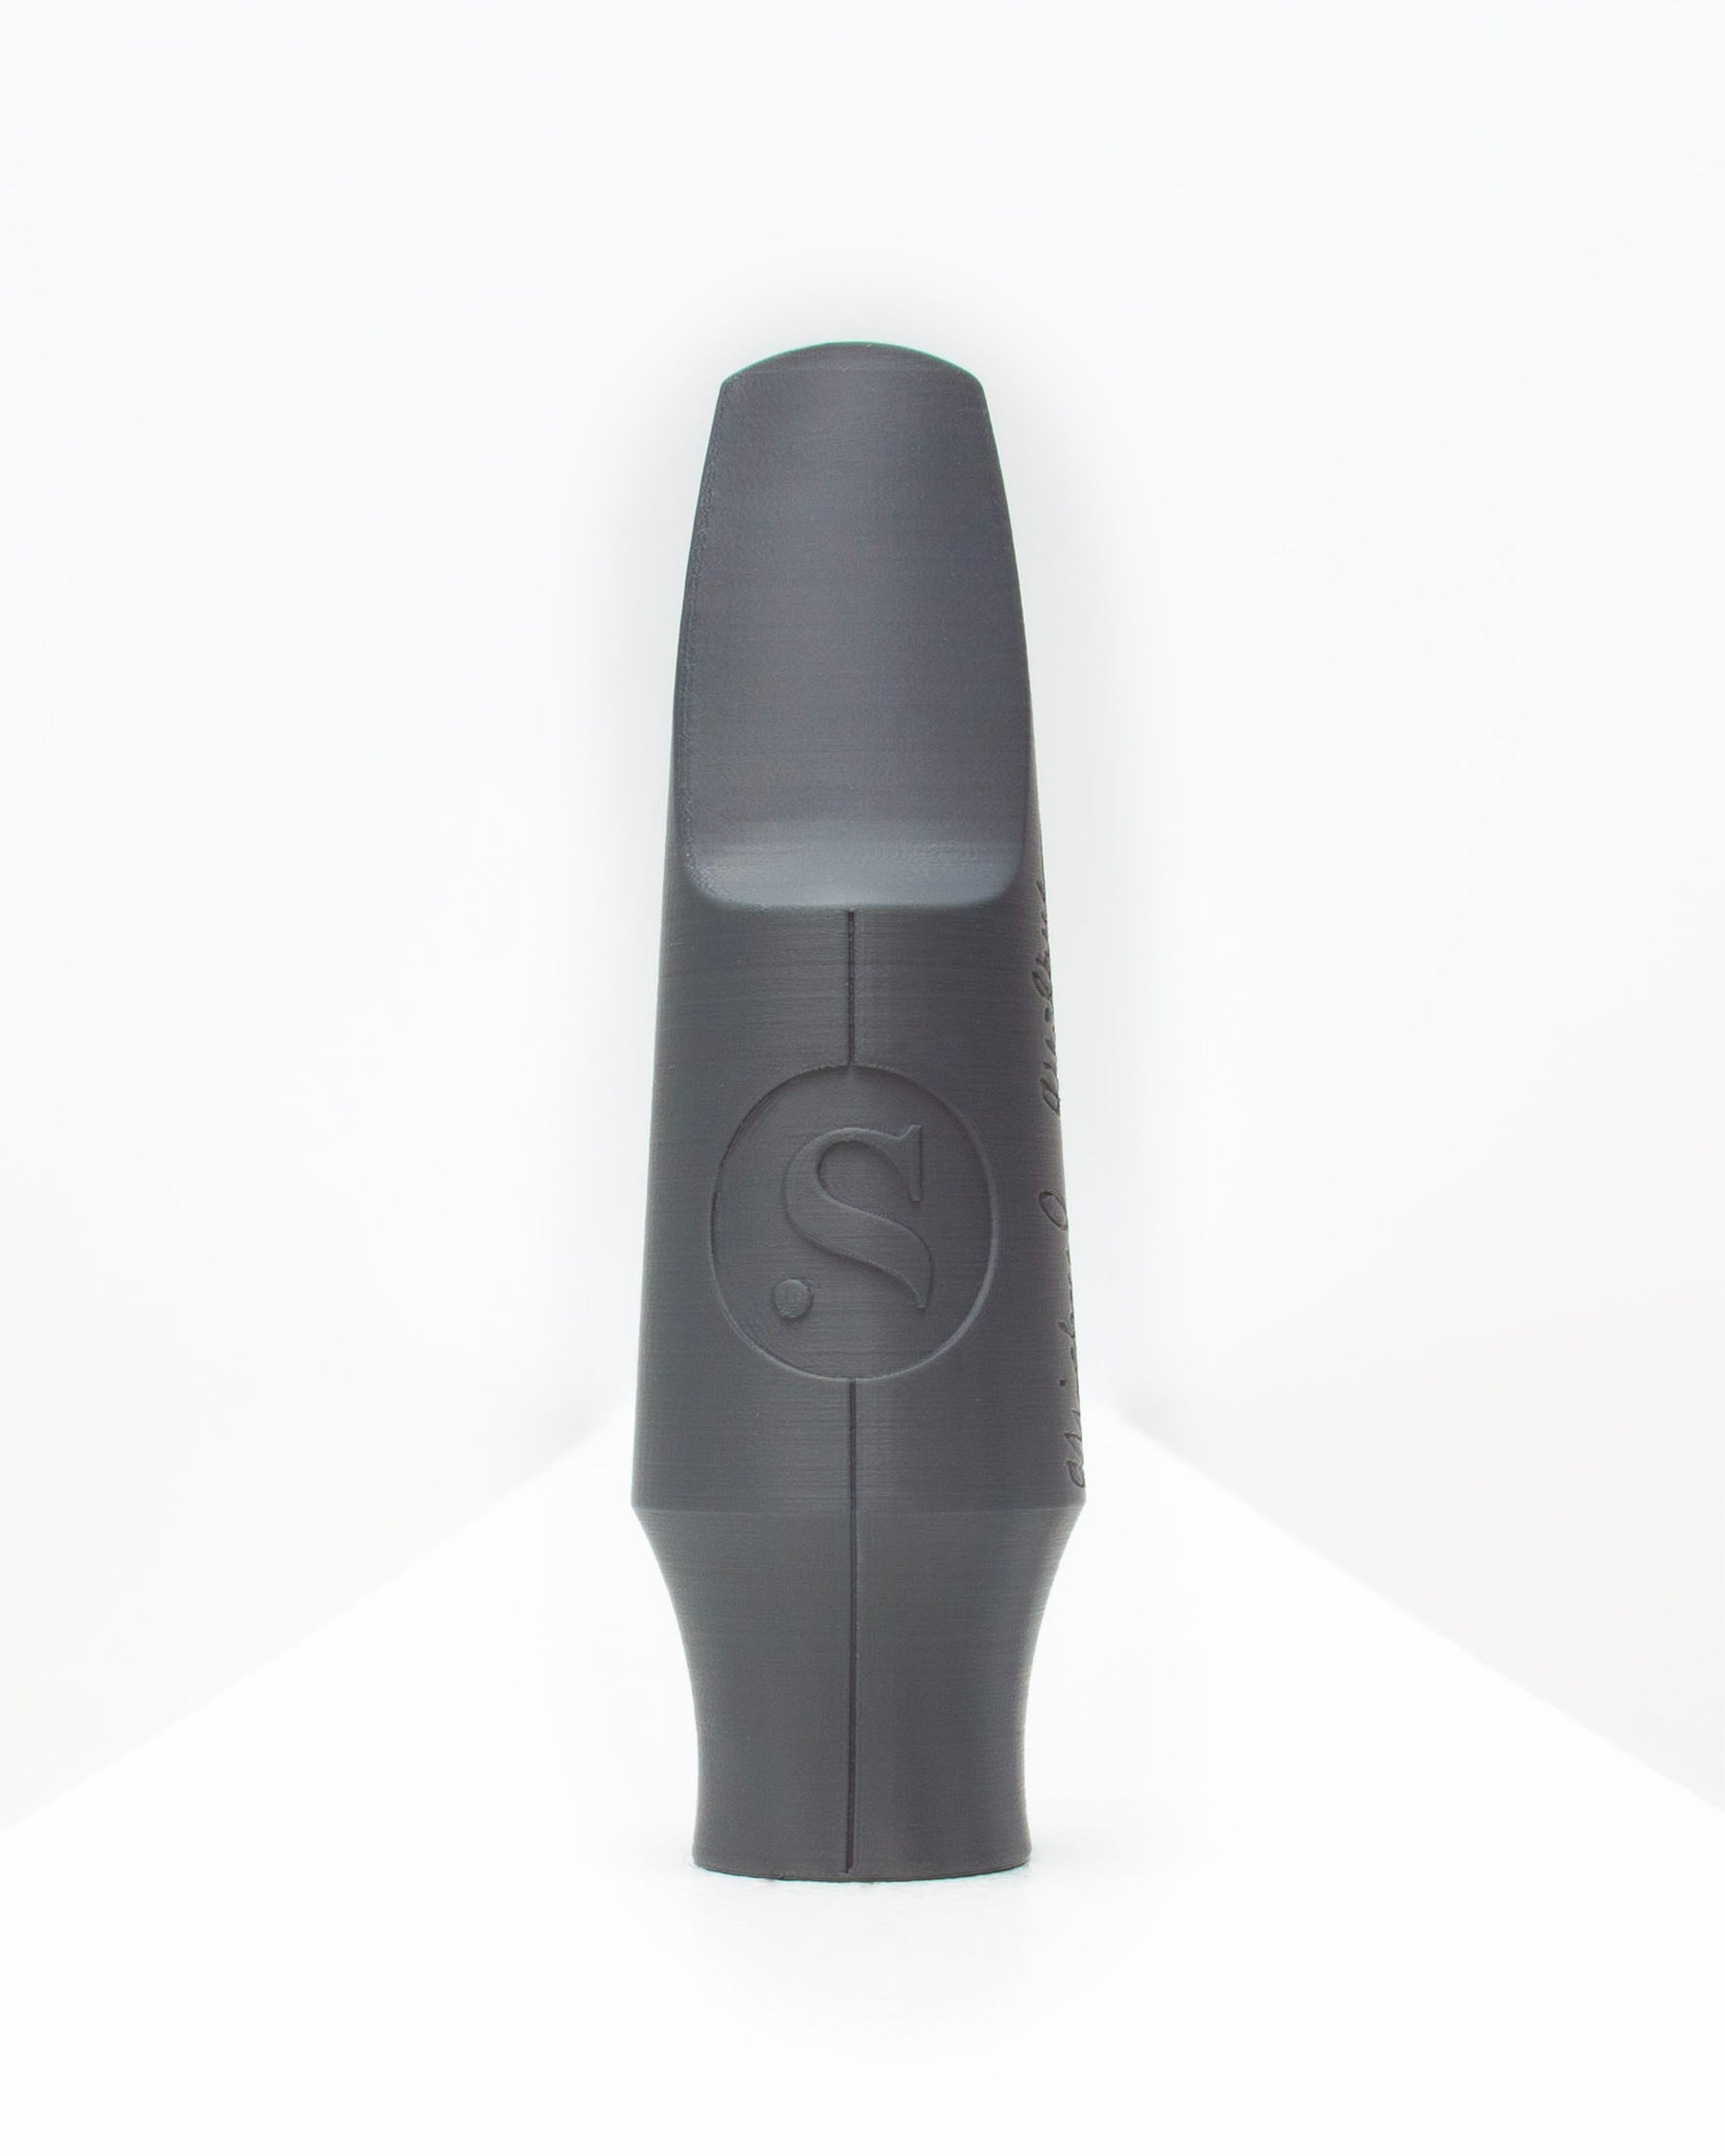 Tenor Signature Saxophone mouthpiece - Daro Behroozi by Syos - 11 / Anthracite Metal